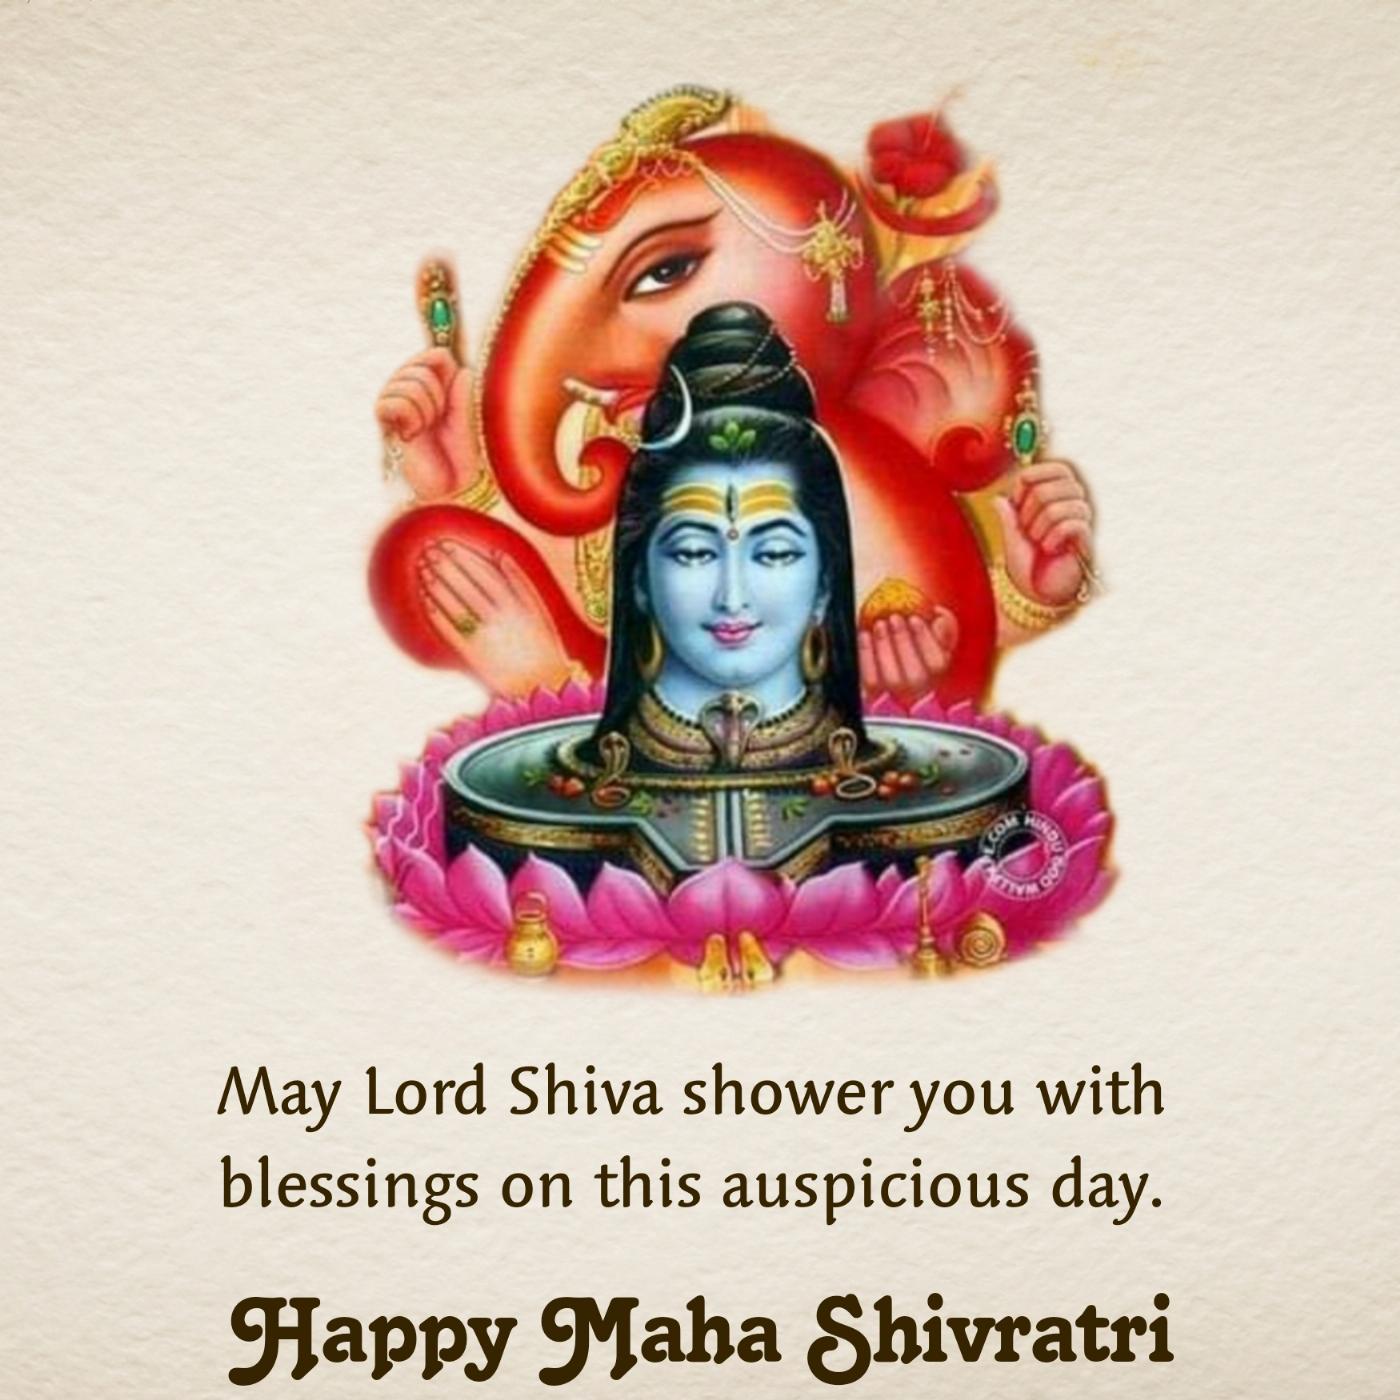 May Lord Shiva shower you with blessings on this auspicious day